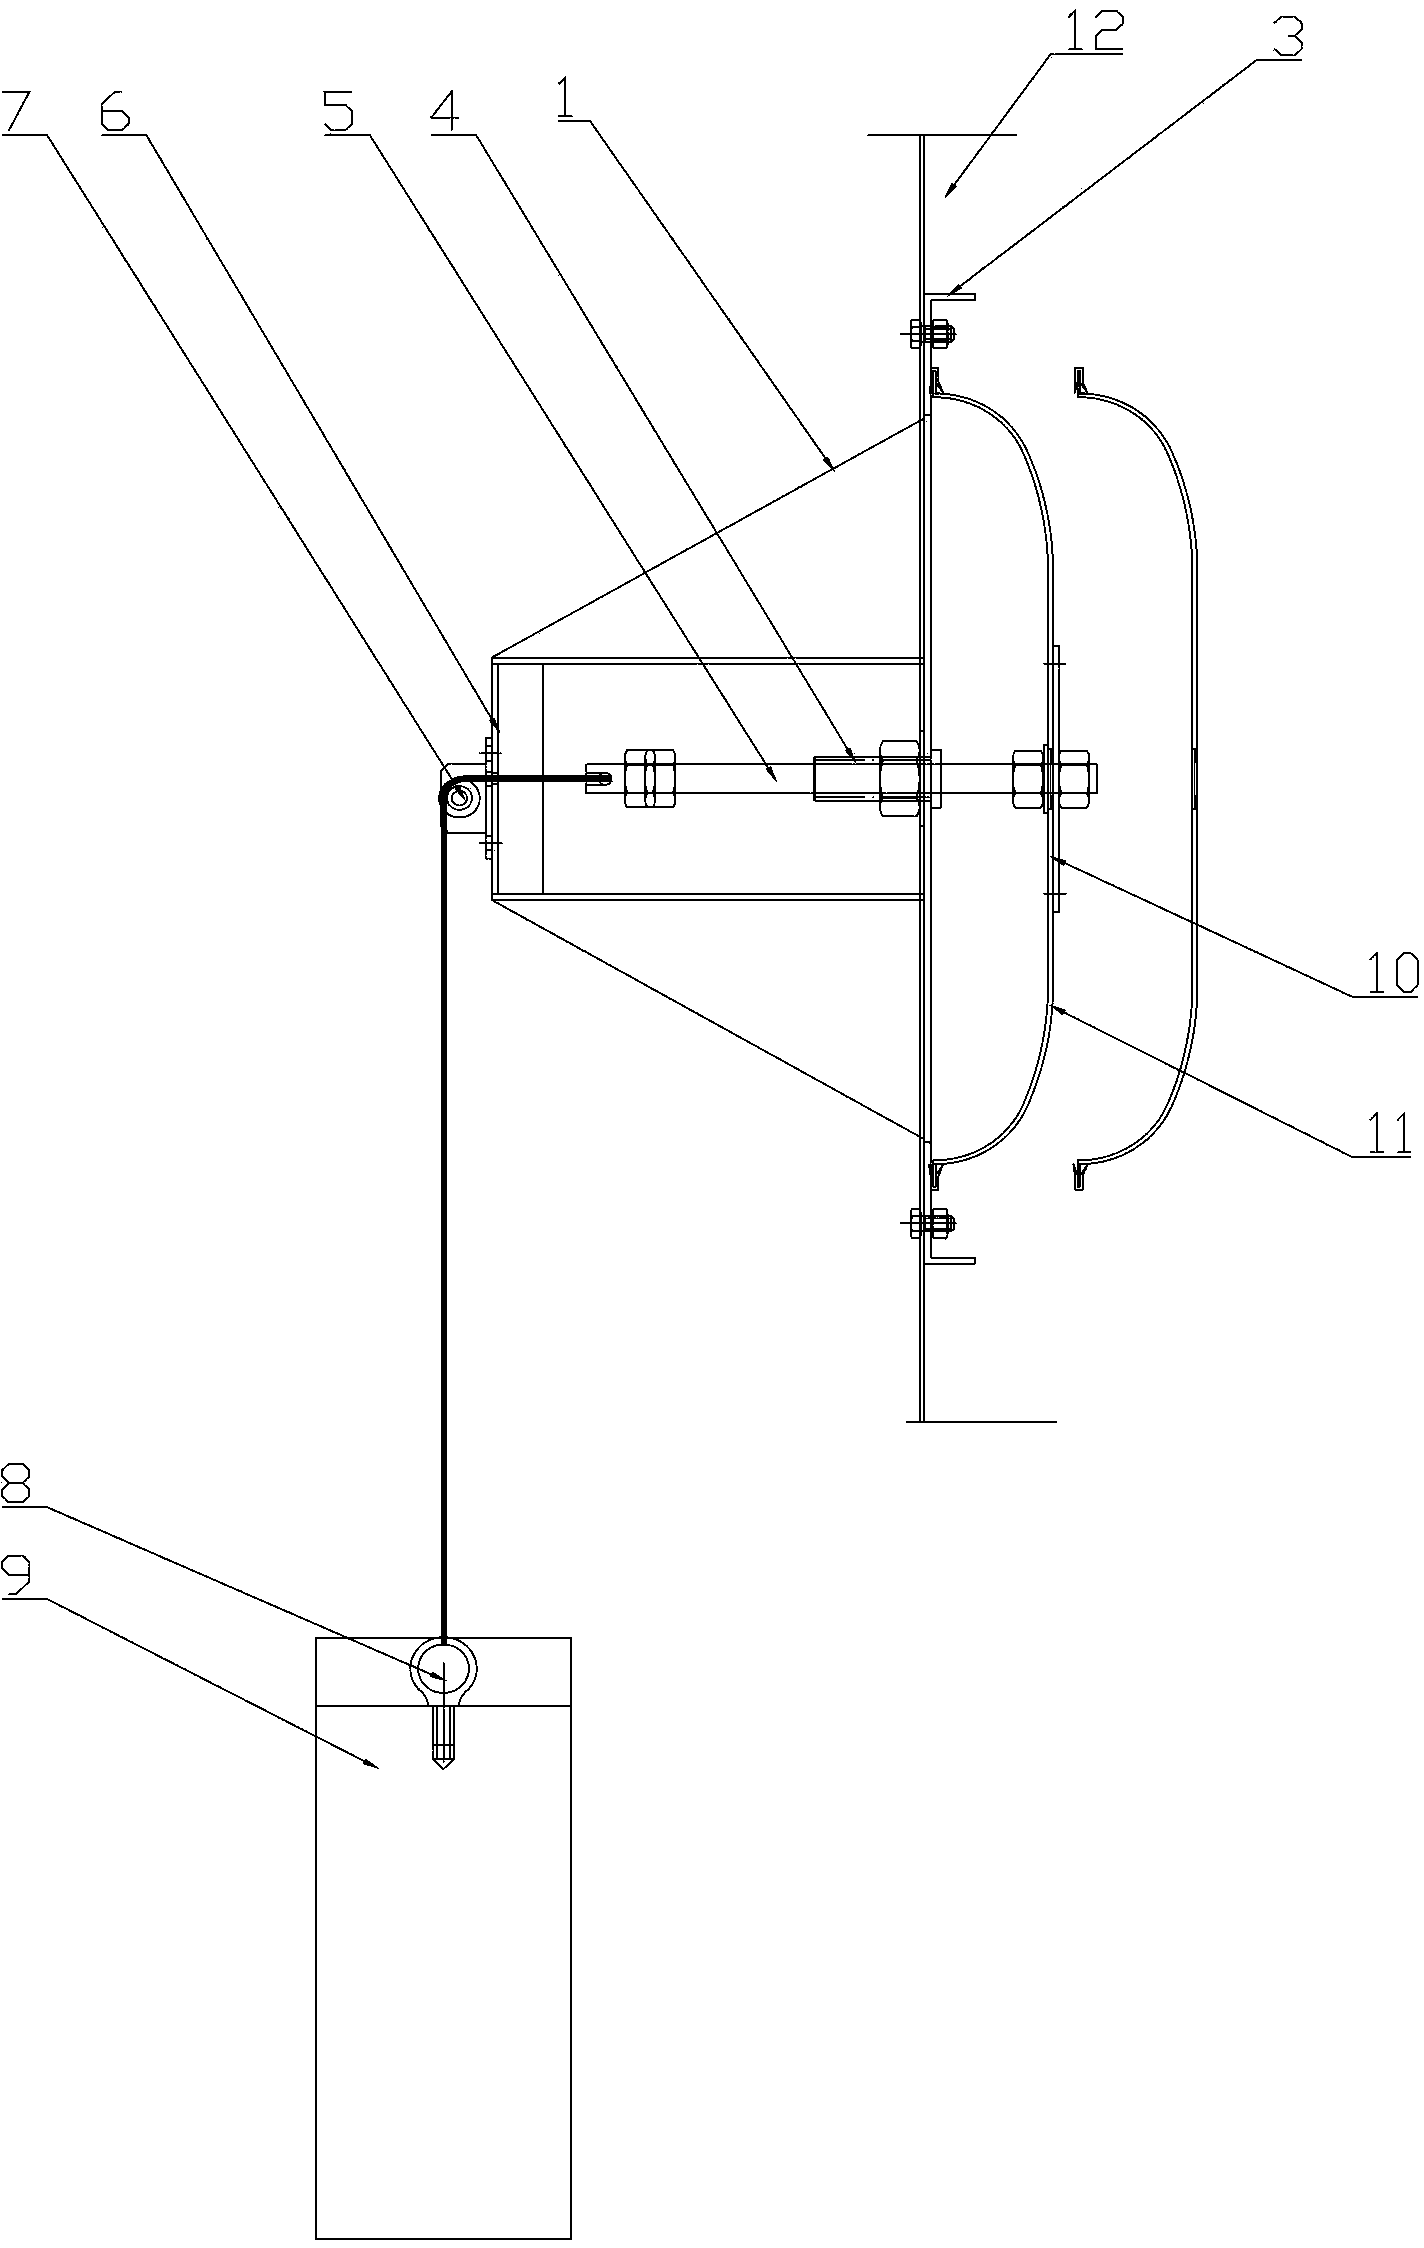 Air chamber pressure relief device of combined type air conditioner unit system